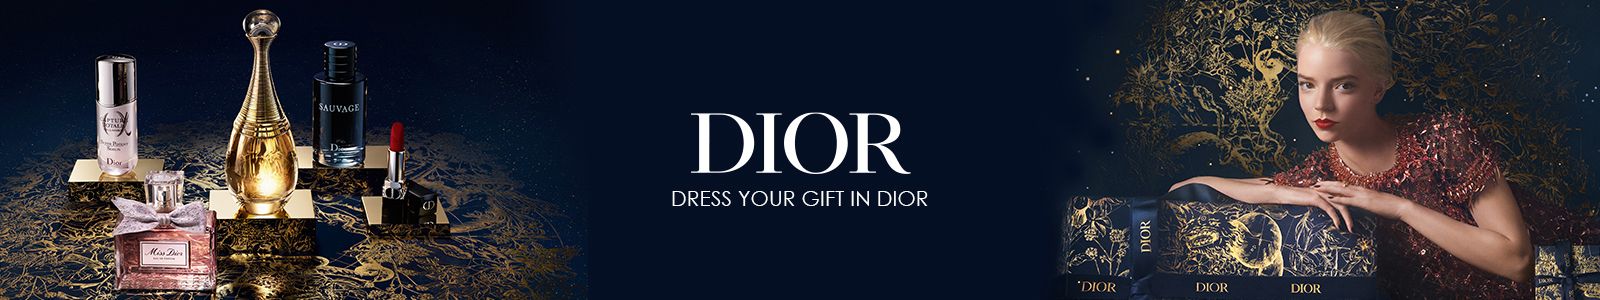 Dior, Dress Your Gift In Dior